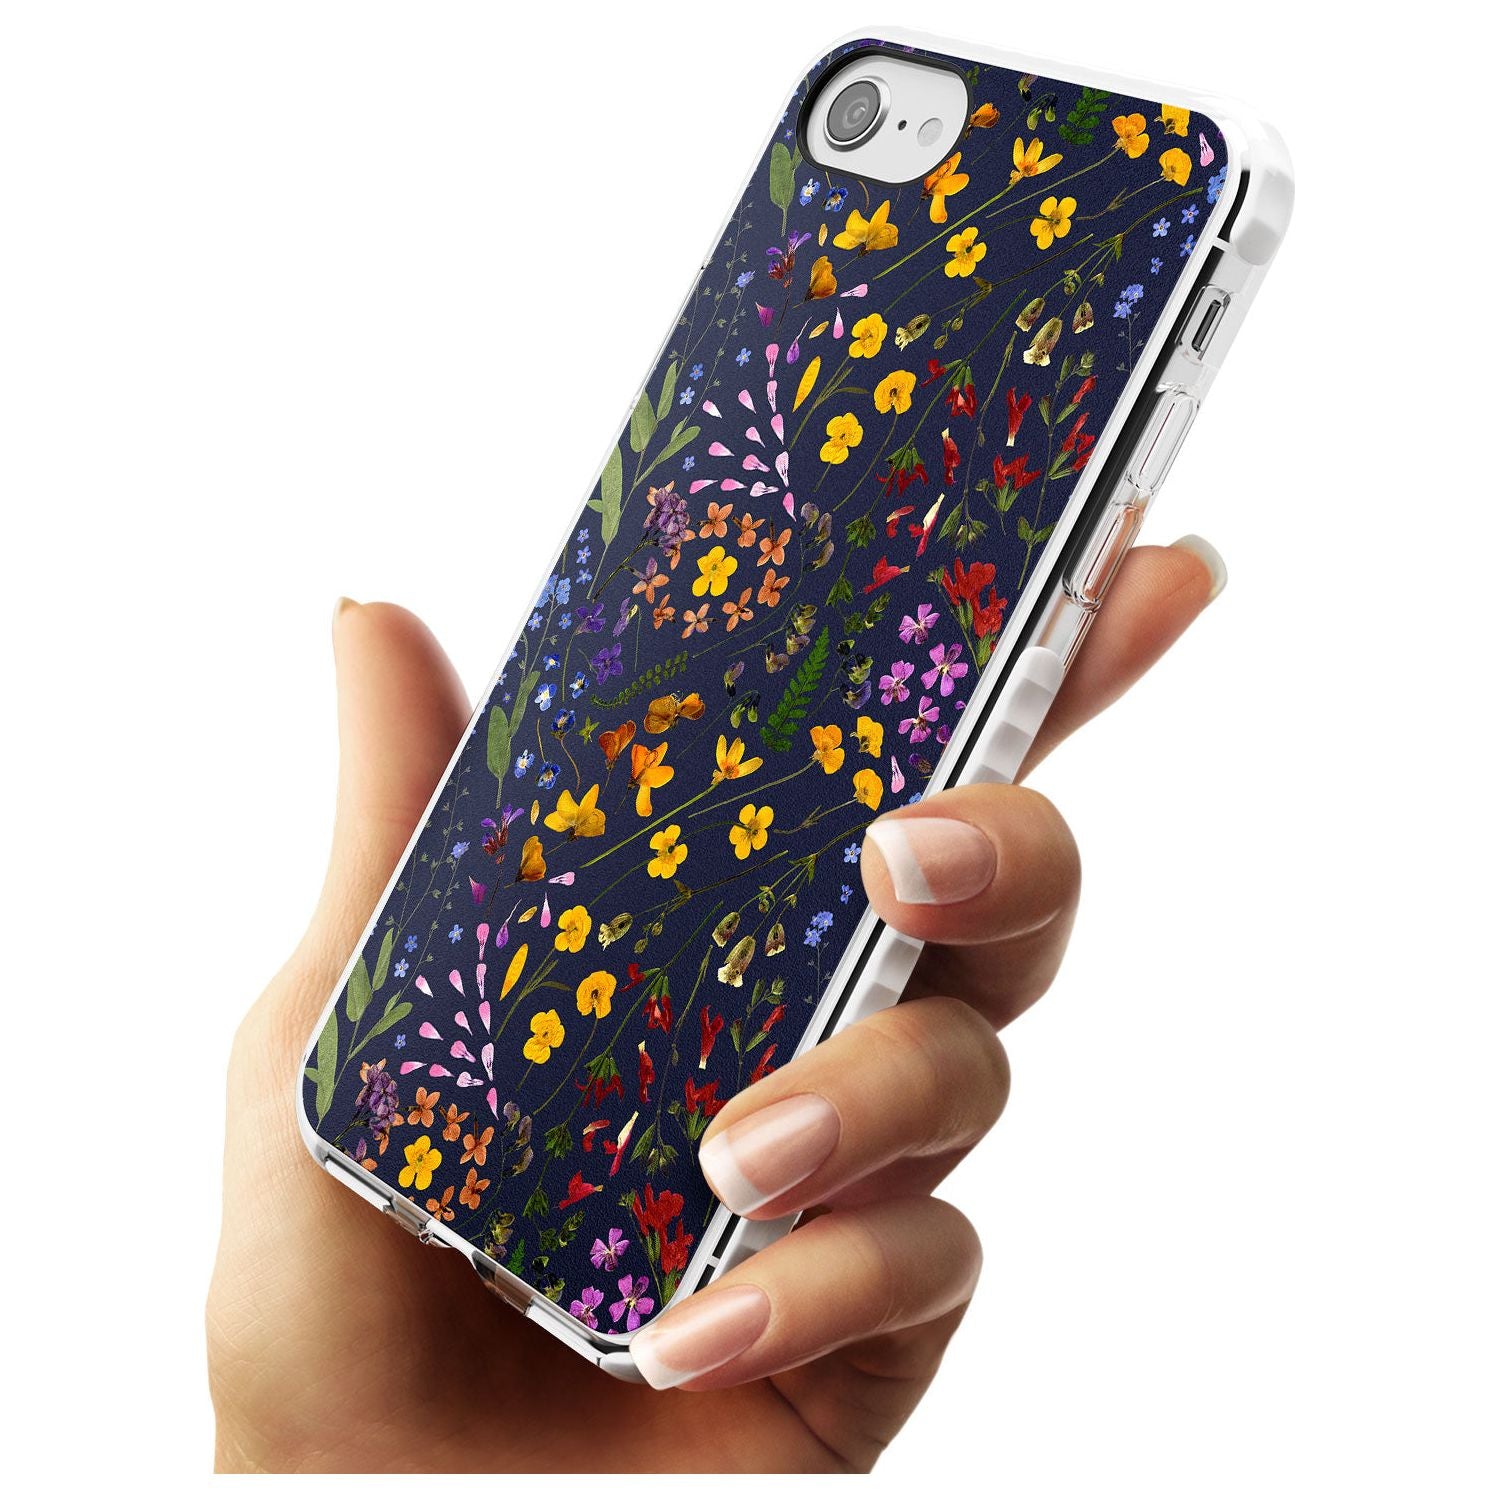 Wildflower & Leaves Cluster Design - Navy Impact Phone Case for iPhone SE 8 7 Plus